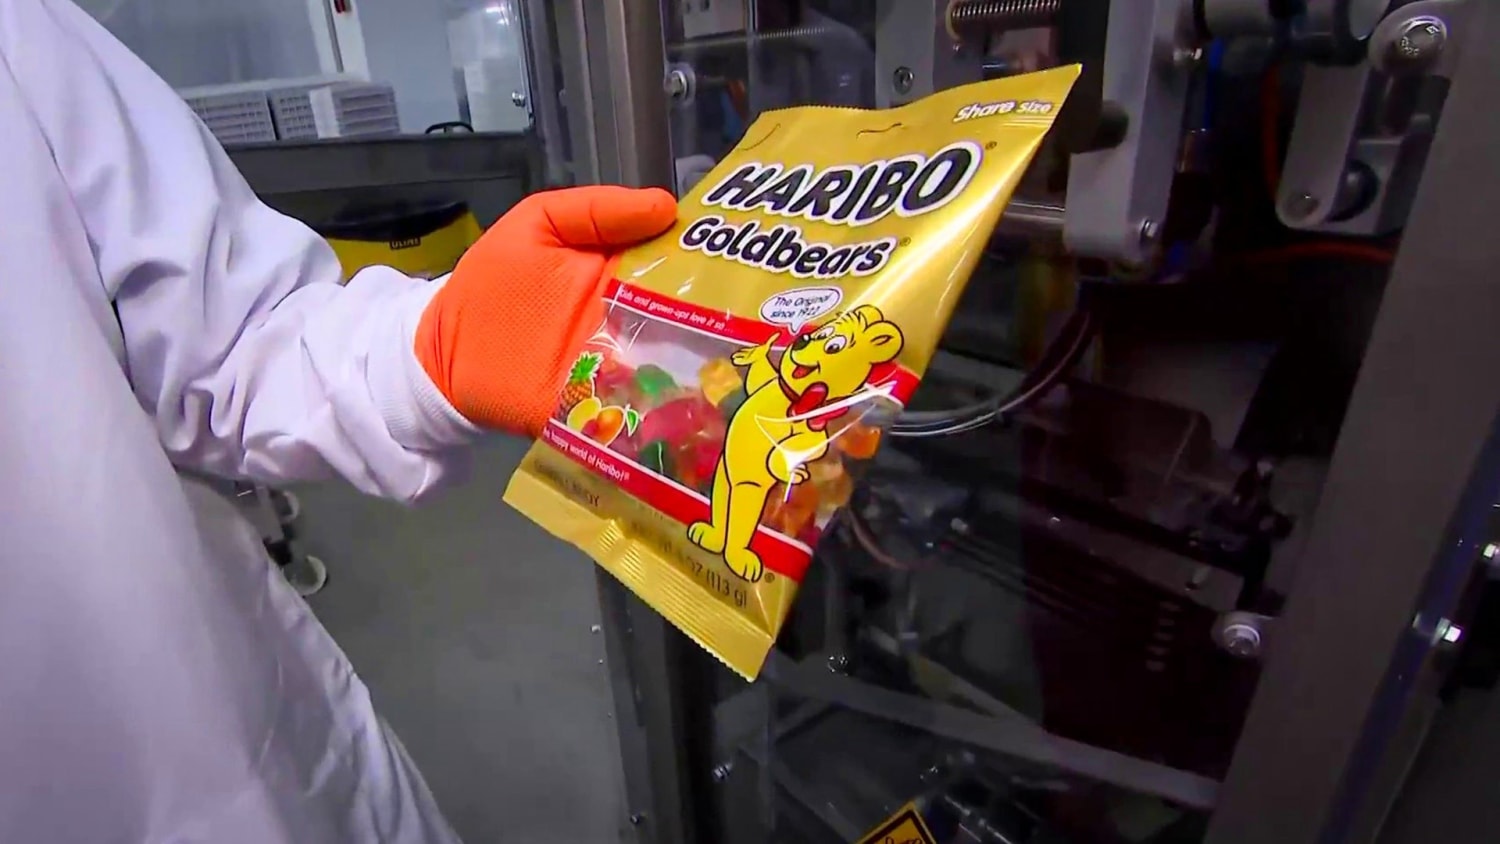 Gummy Bear Maker Haribo to Open First U.S. Plant - TheStreet